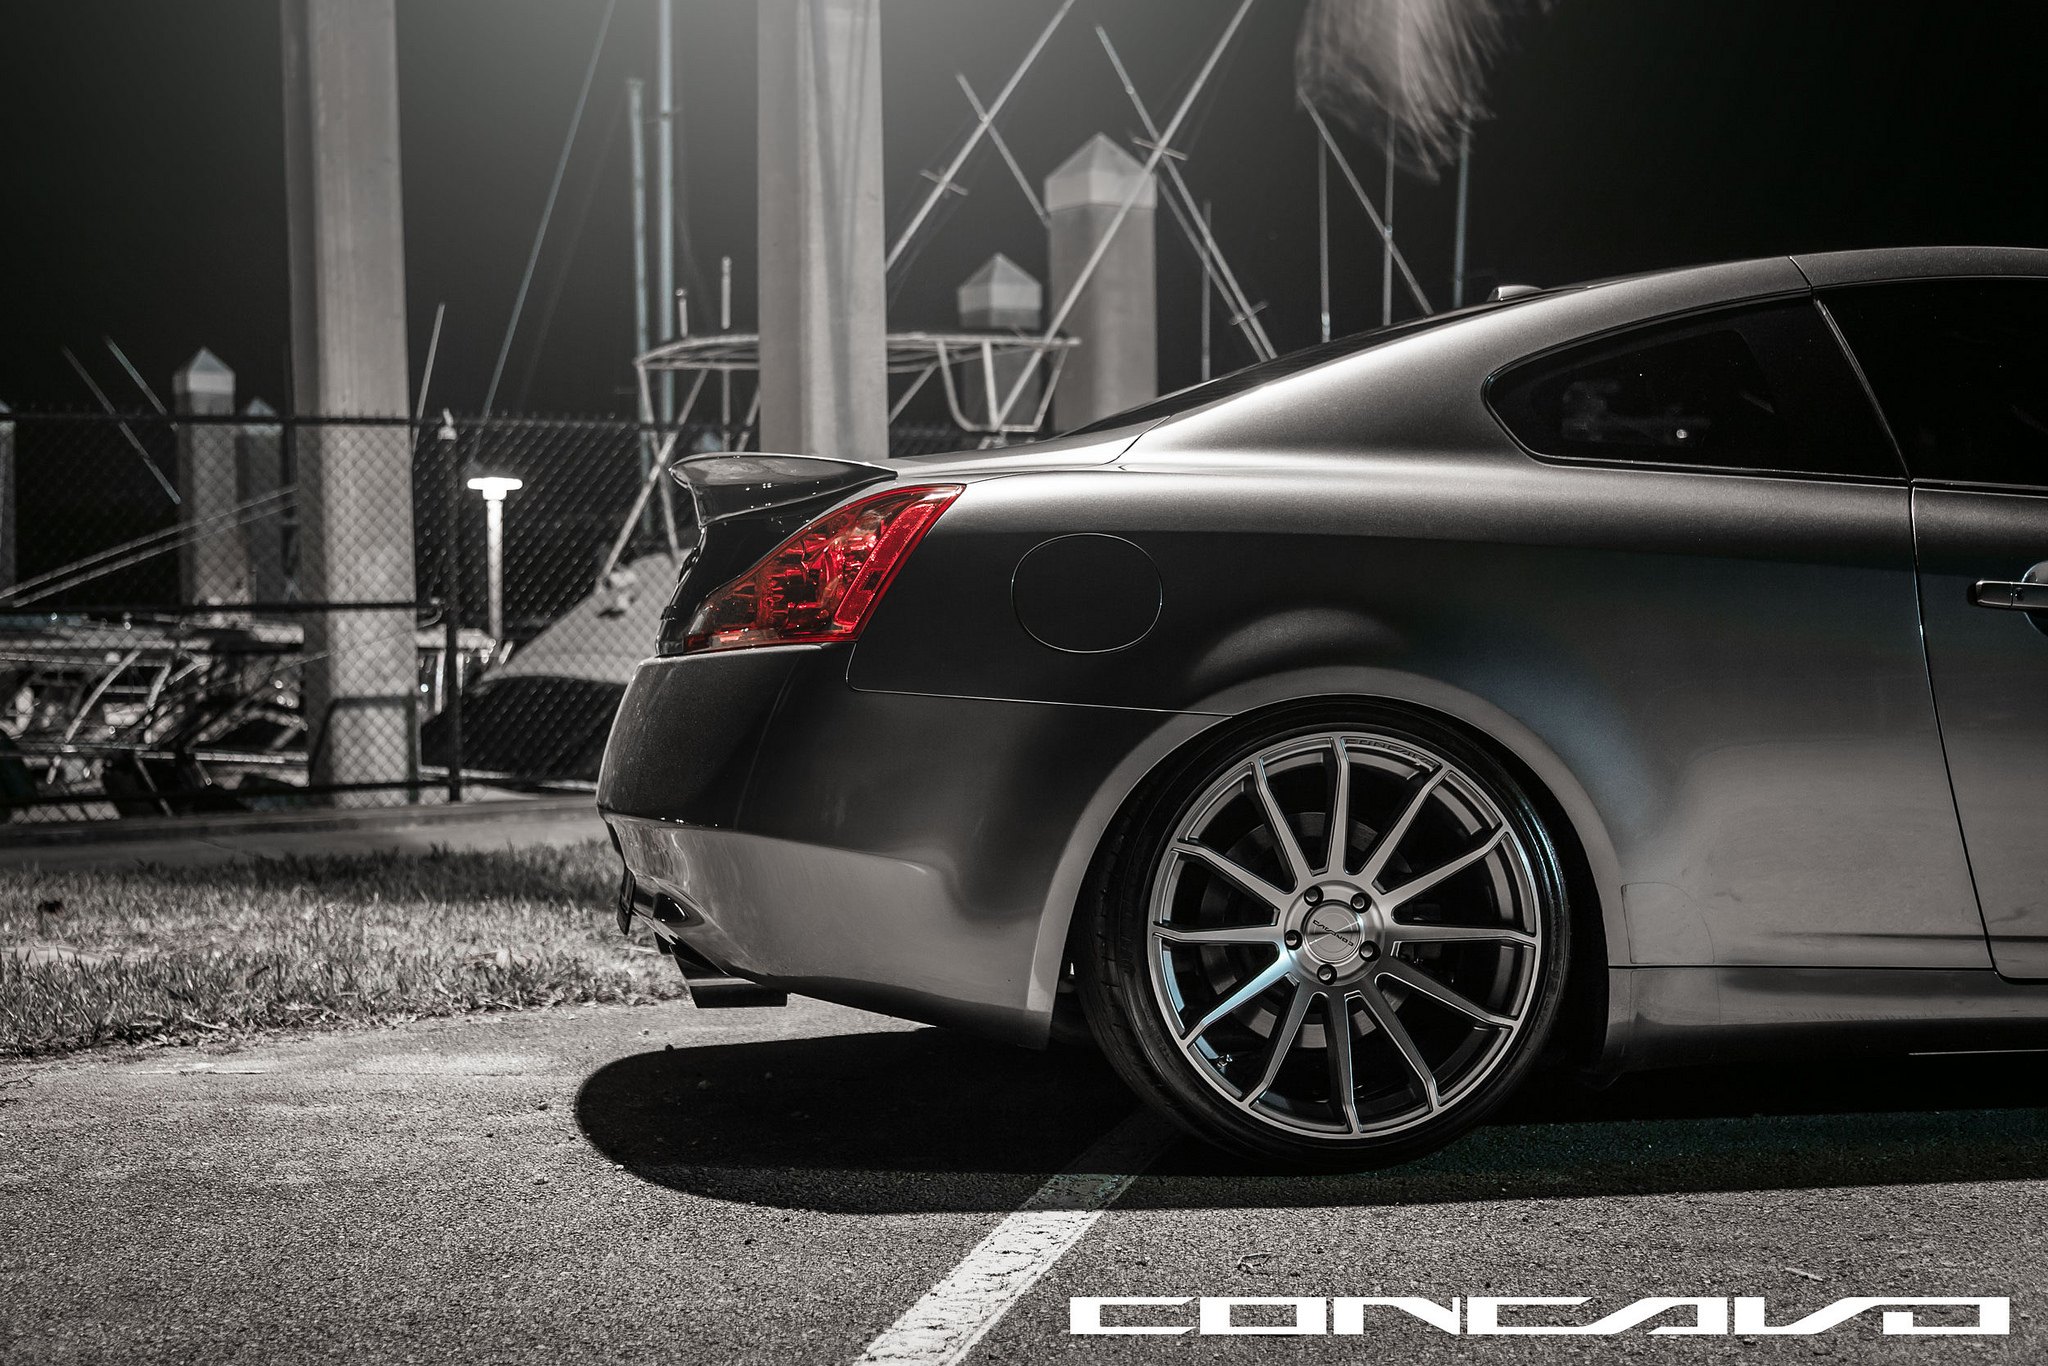 Aftermarket Rear Spoiler on Black Infiniti G37 - Photo by Concavo Wheels